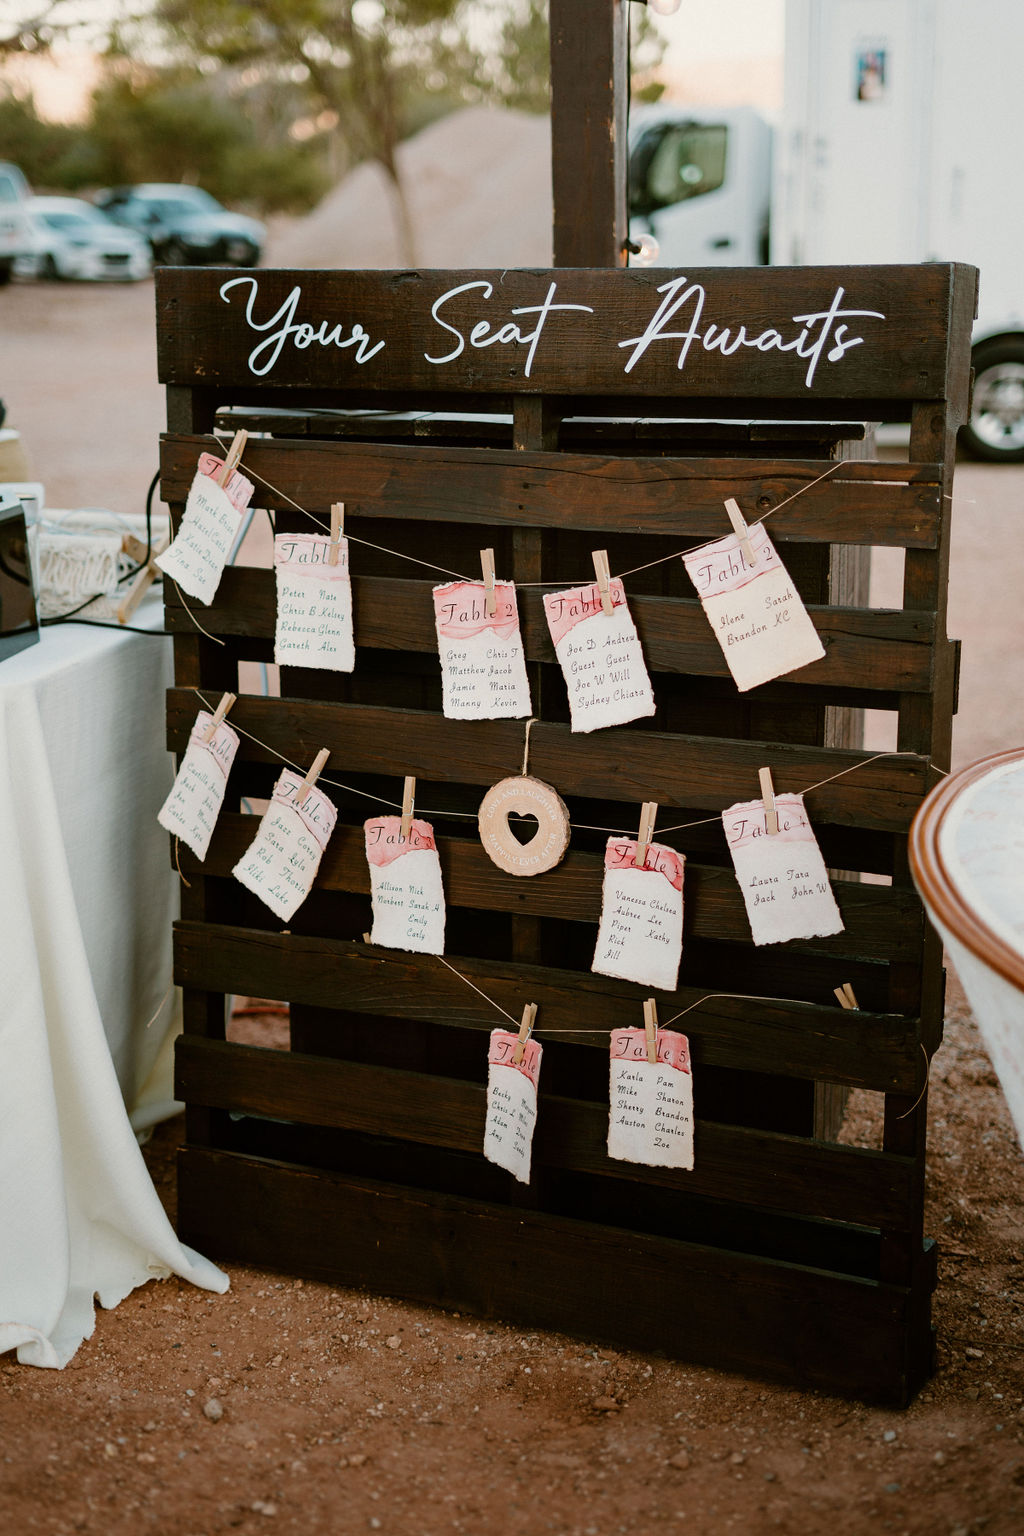 Rustic wooden seating chart with cards hanging, labeled "your seat awaits," at an outdoor event.